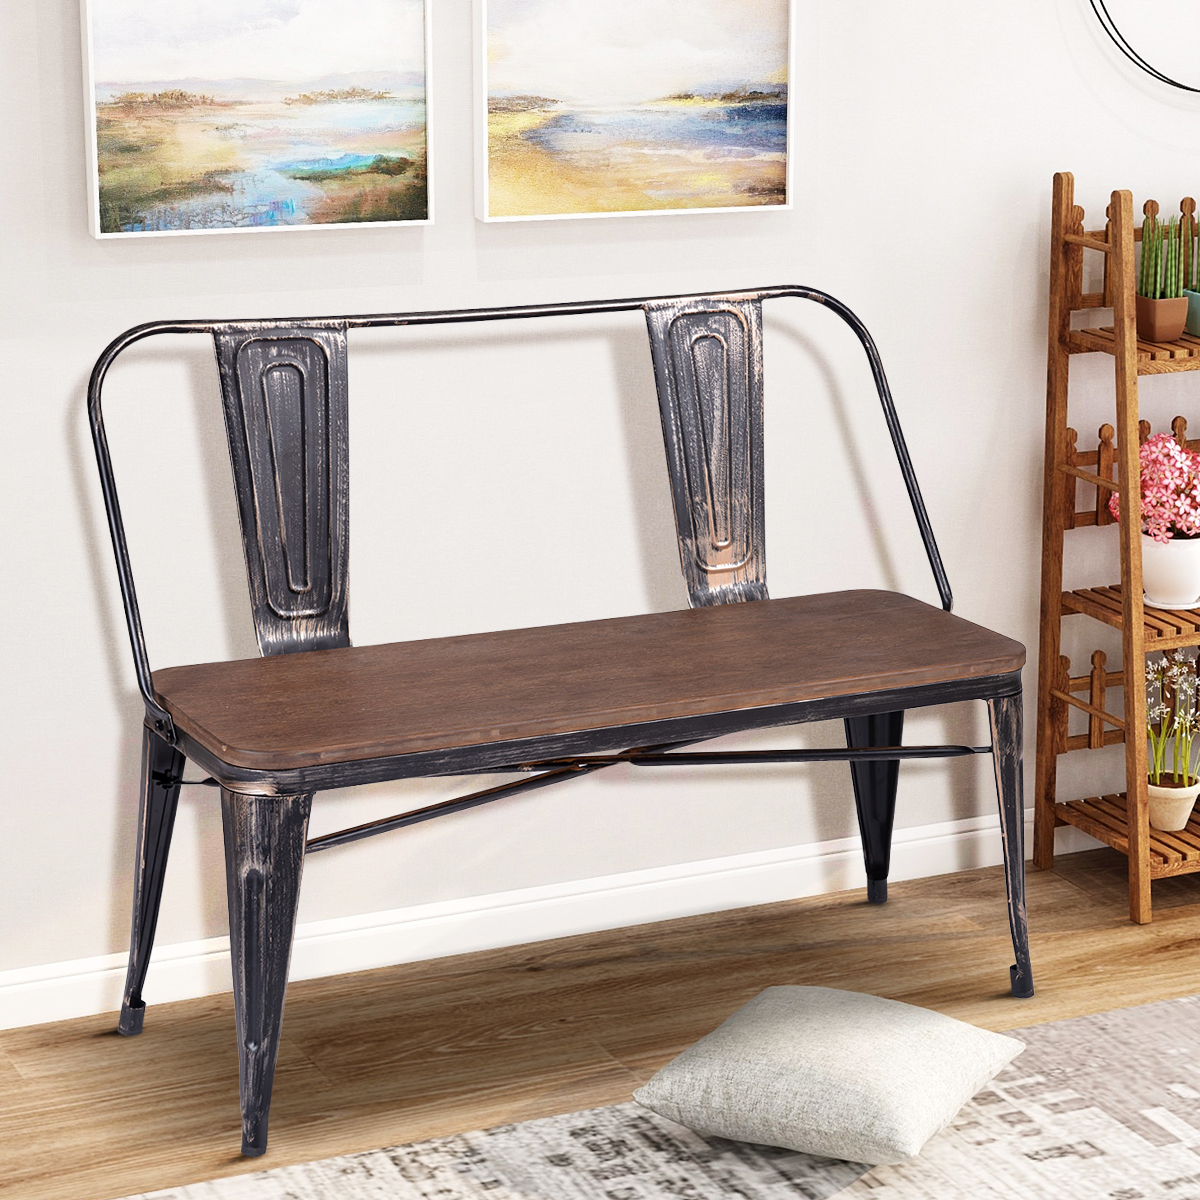 TREXM Rustic Vintage Style Distressed Dining Table Bench with Wooden Seat Panel and Metal Backrest  Legs-CASAINC